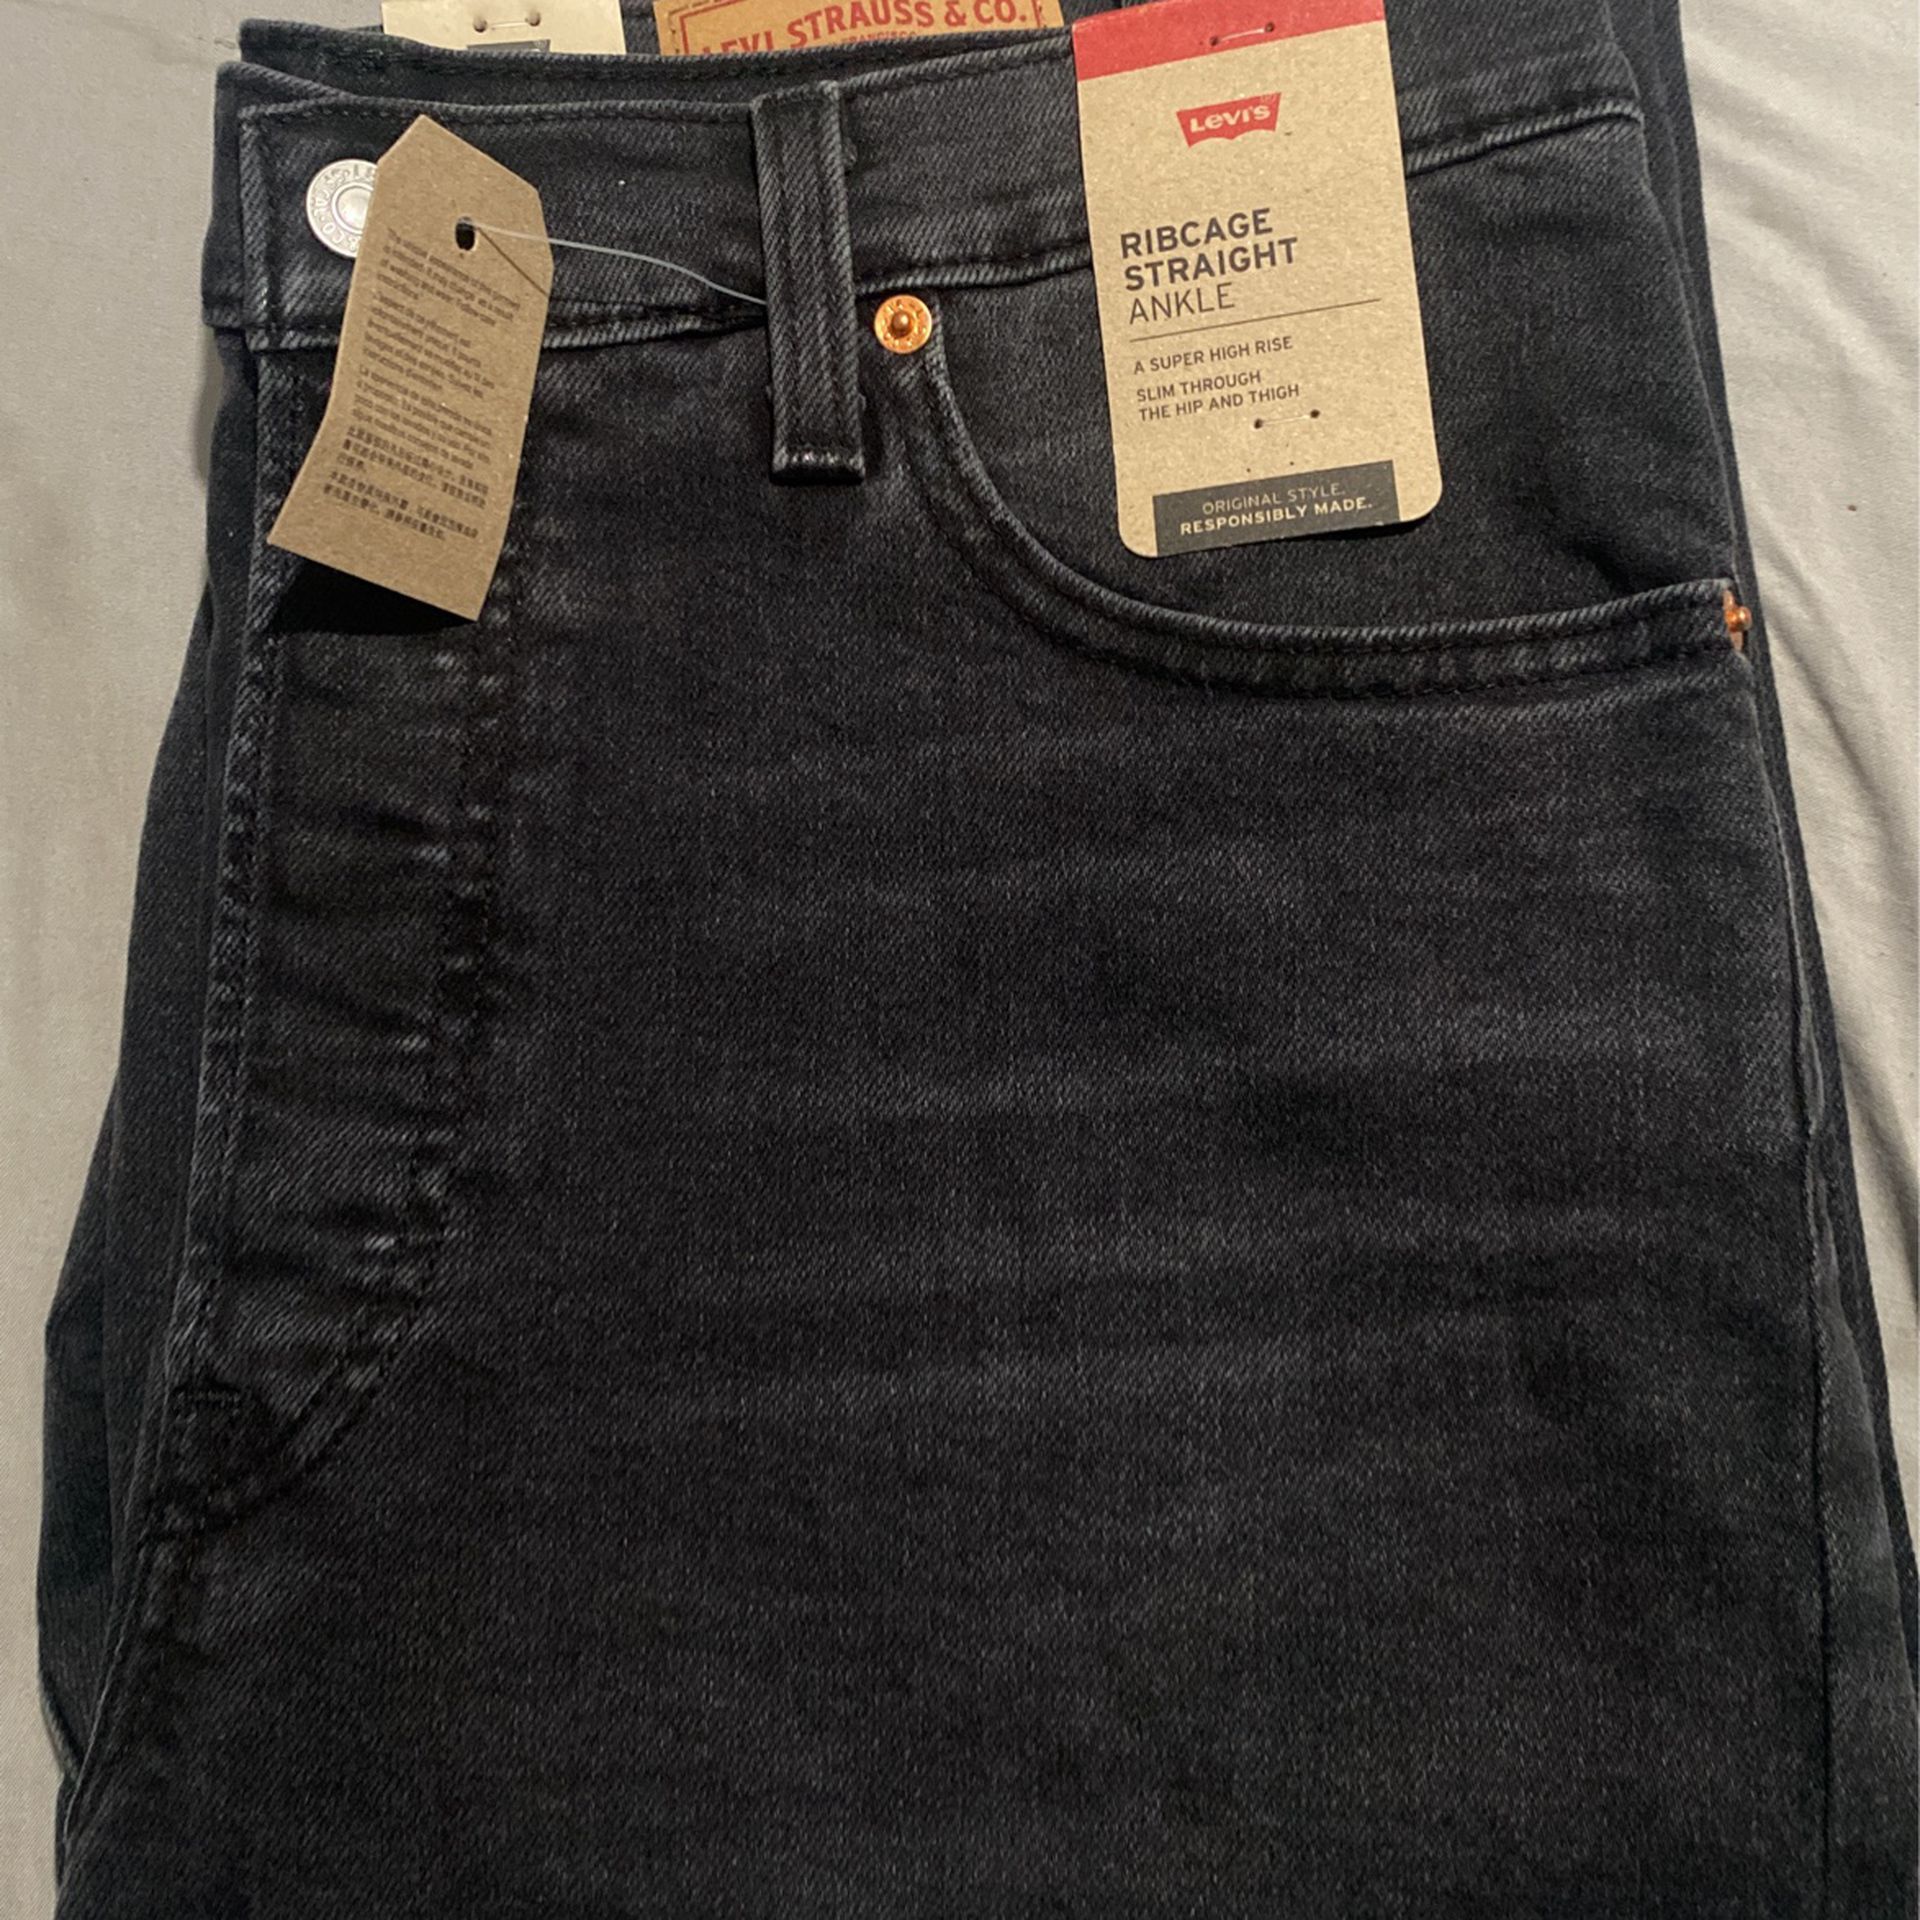 31x27 Levi’s Women’s Ribcage Straight Ankle